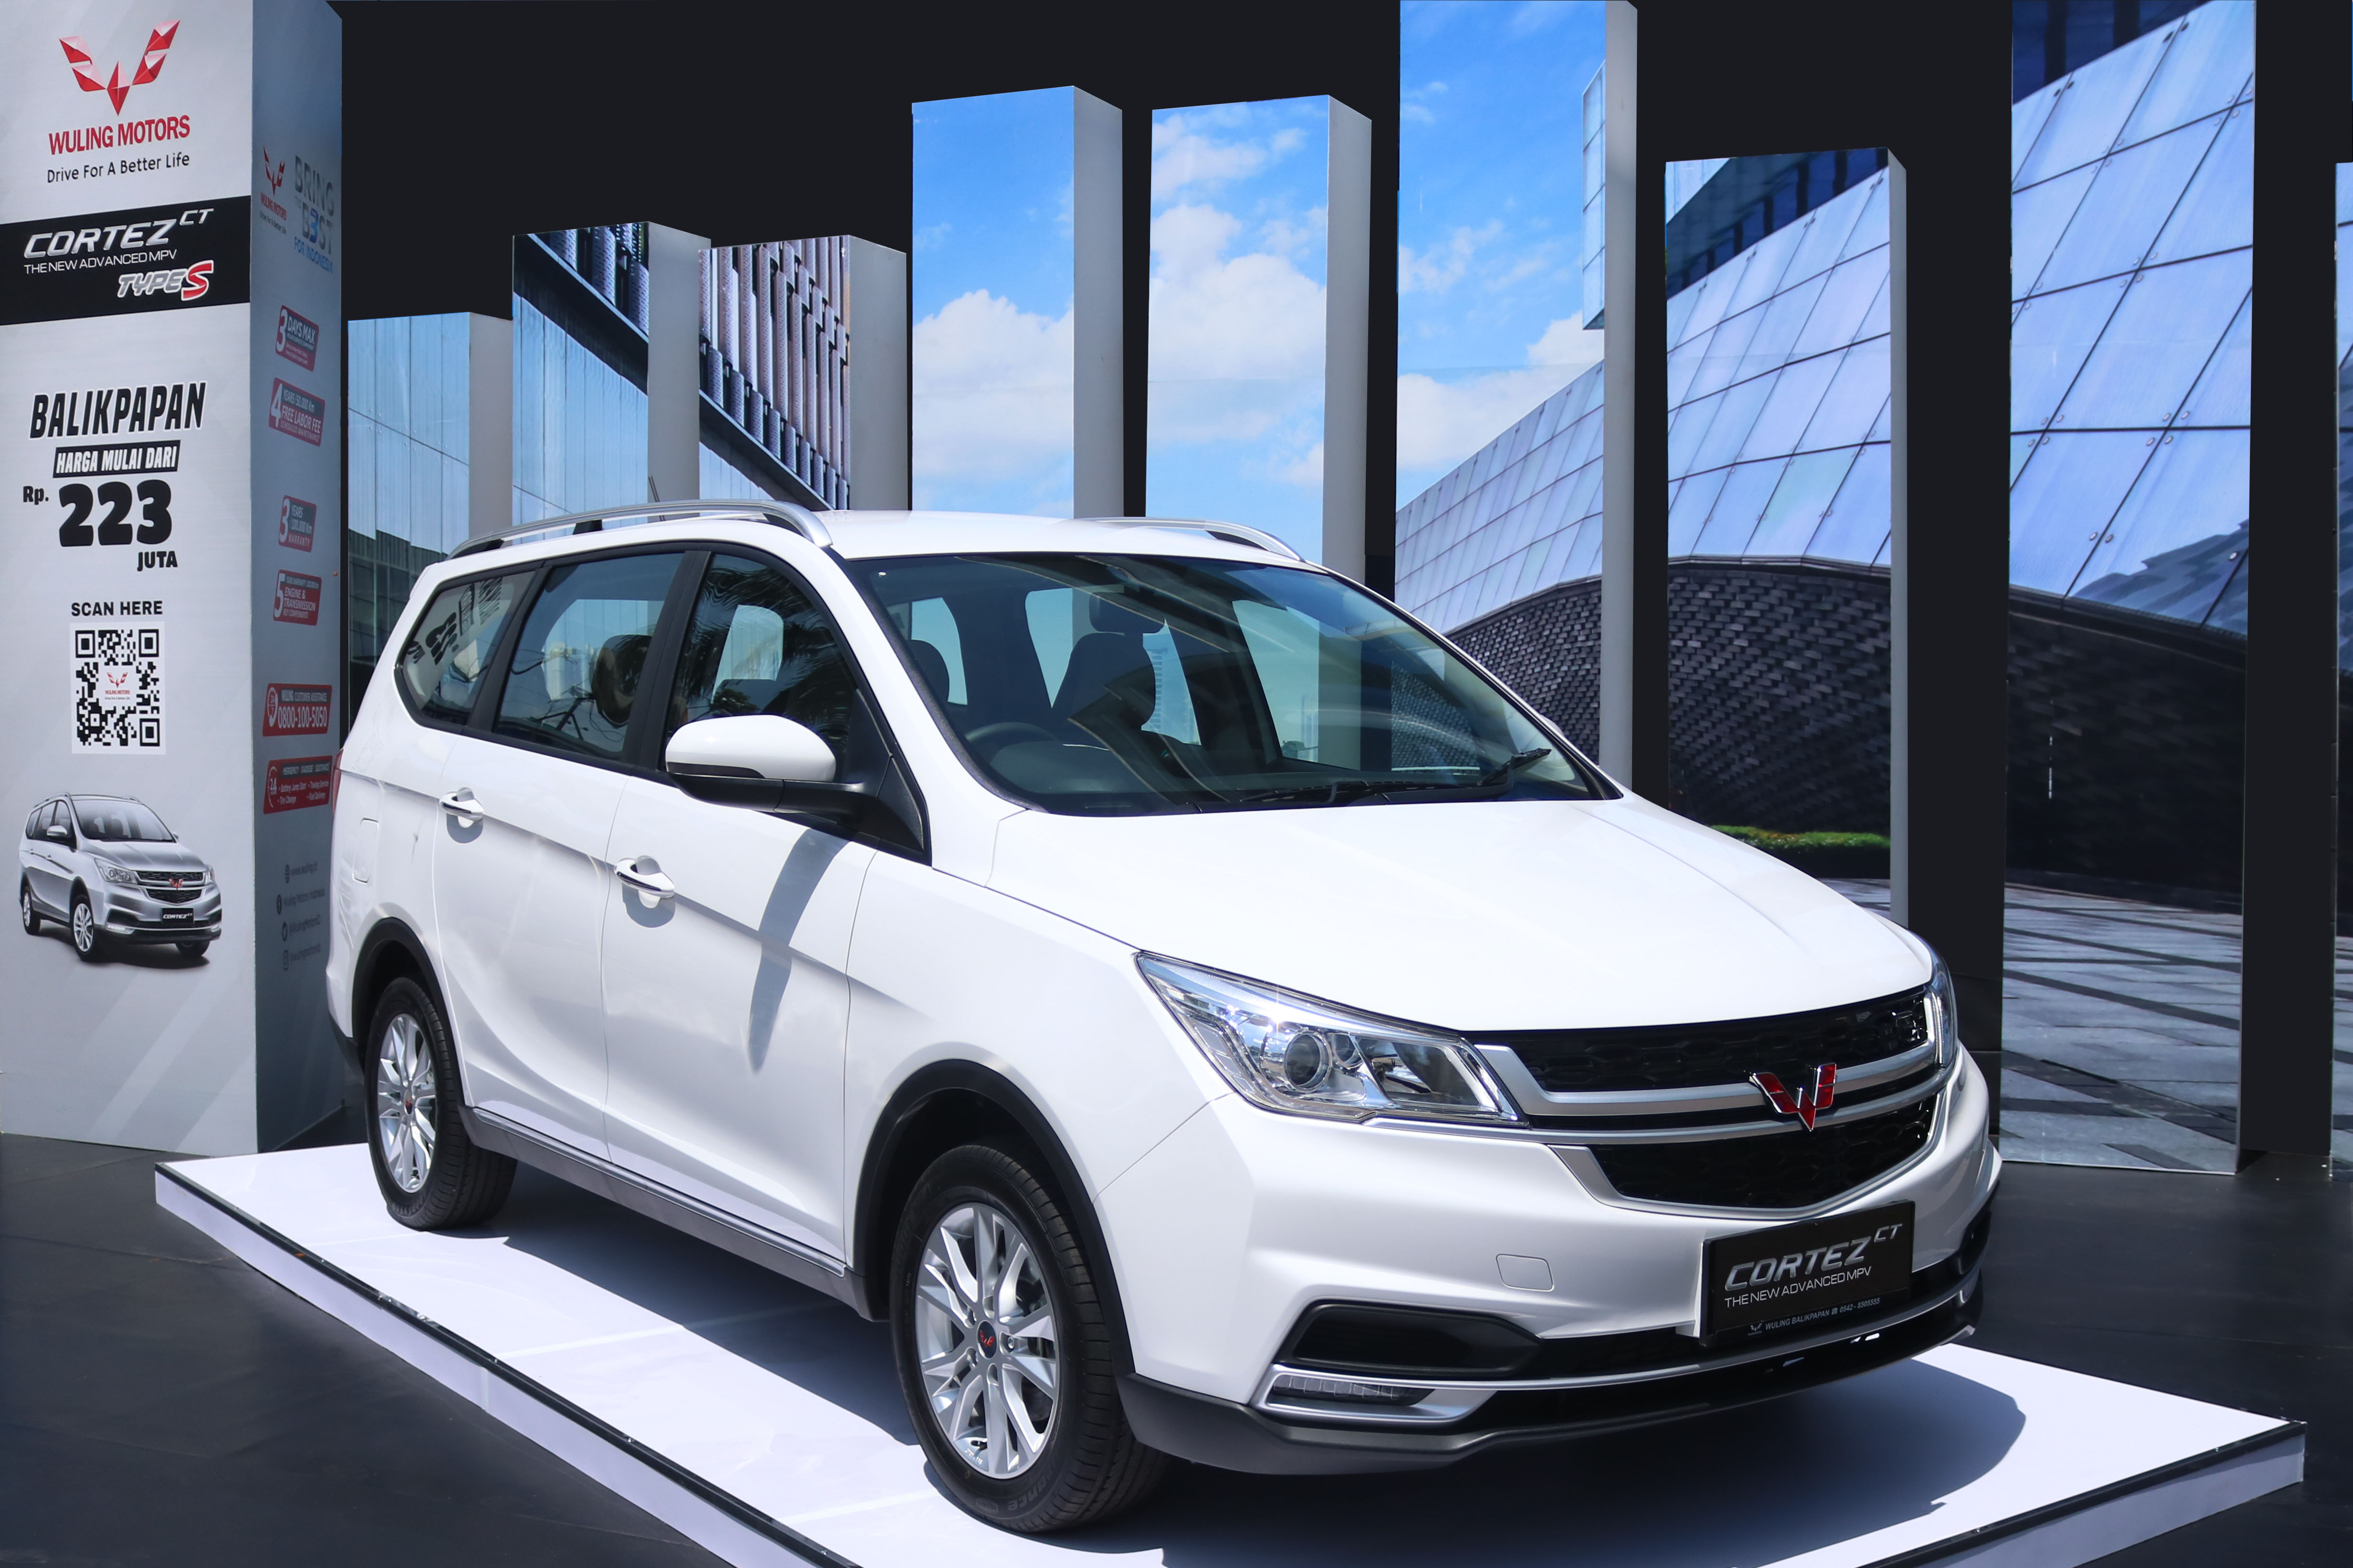 Image Wuling Officially Introduces Cortez CT Type S in Balikpapan